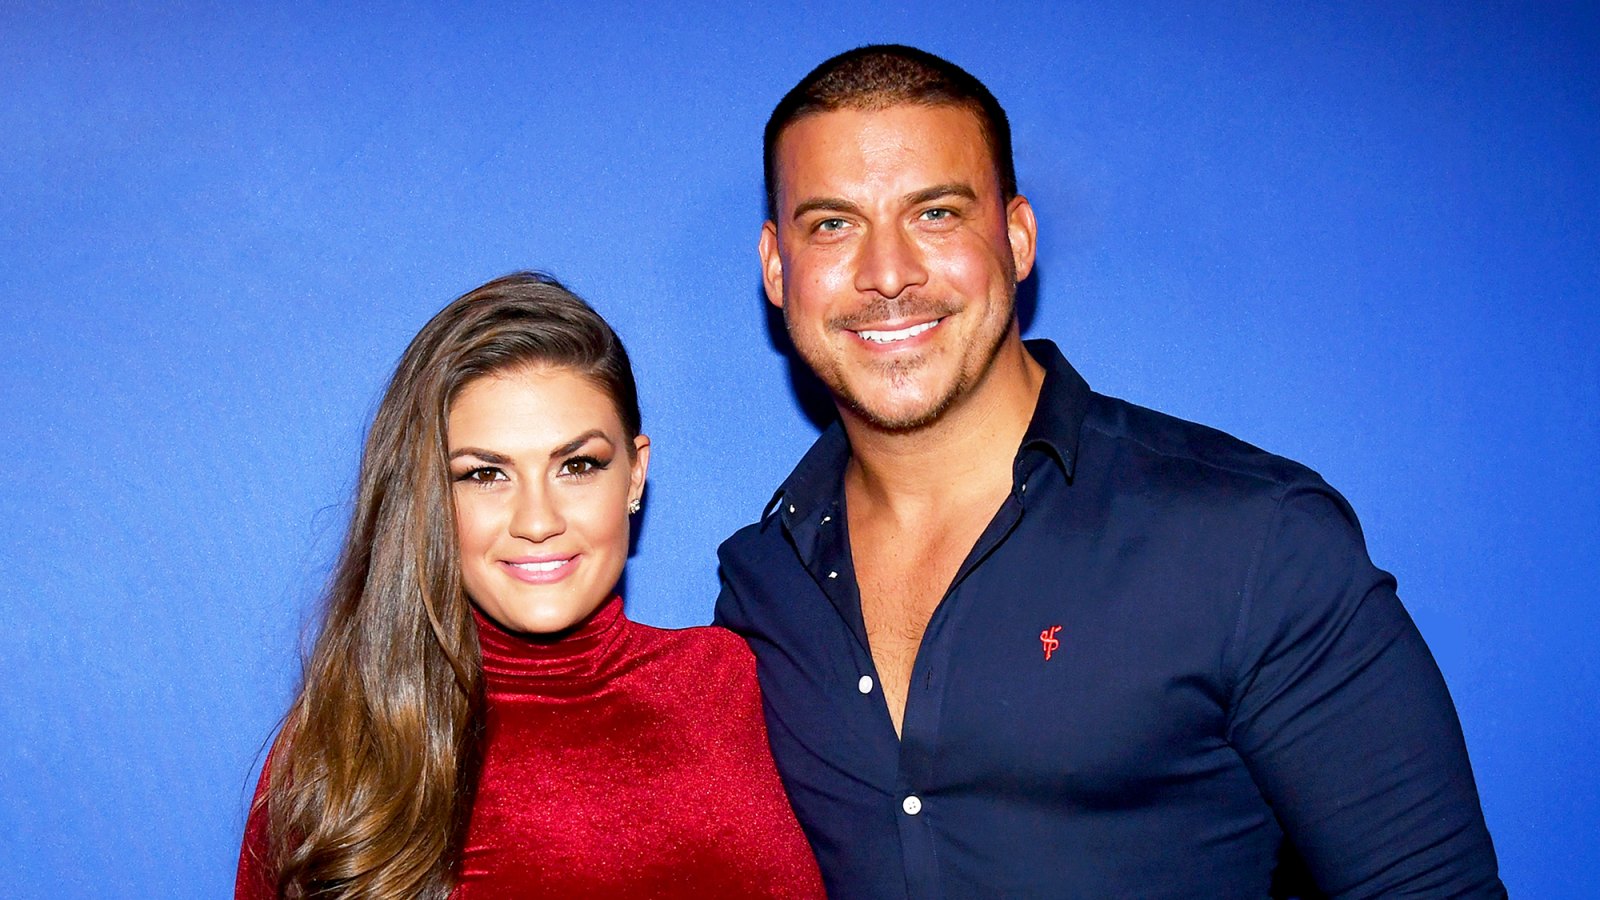 Brittany Cartwright and Jax Taylor attend 2017 Holiday Party with Flo Rida at The Magic Hour in New York City.